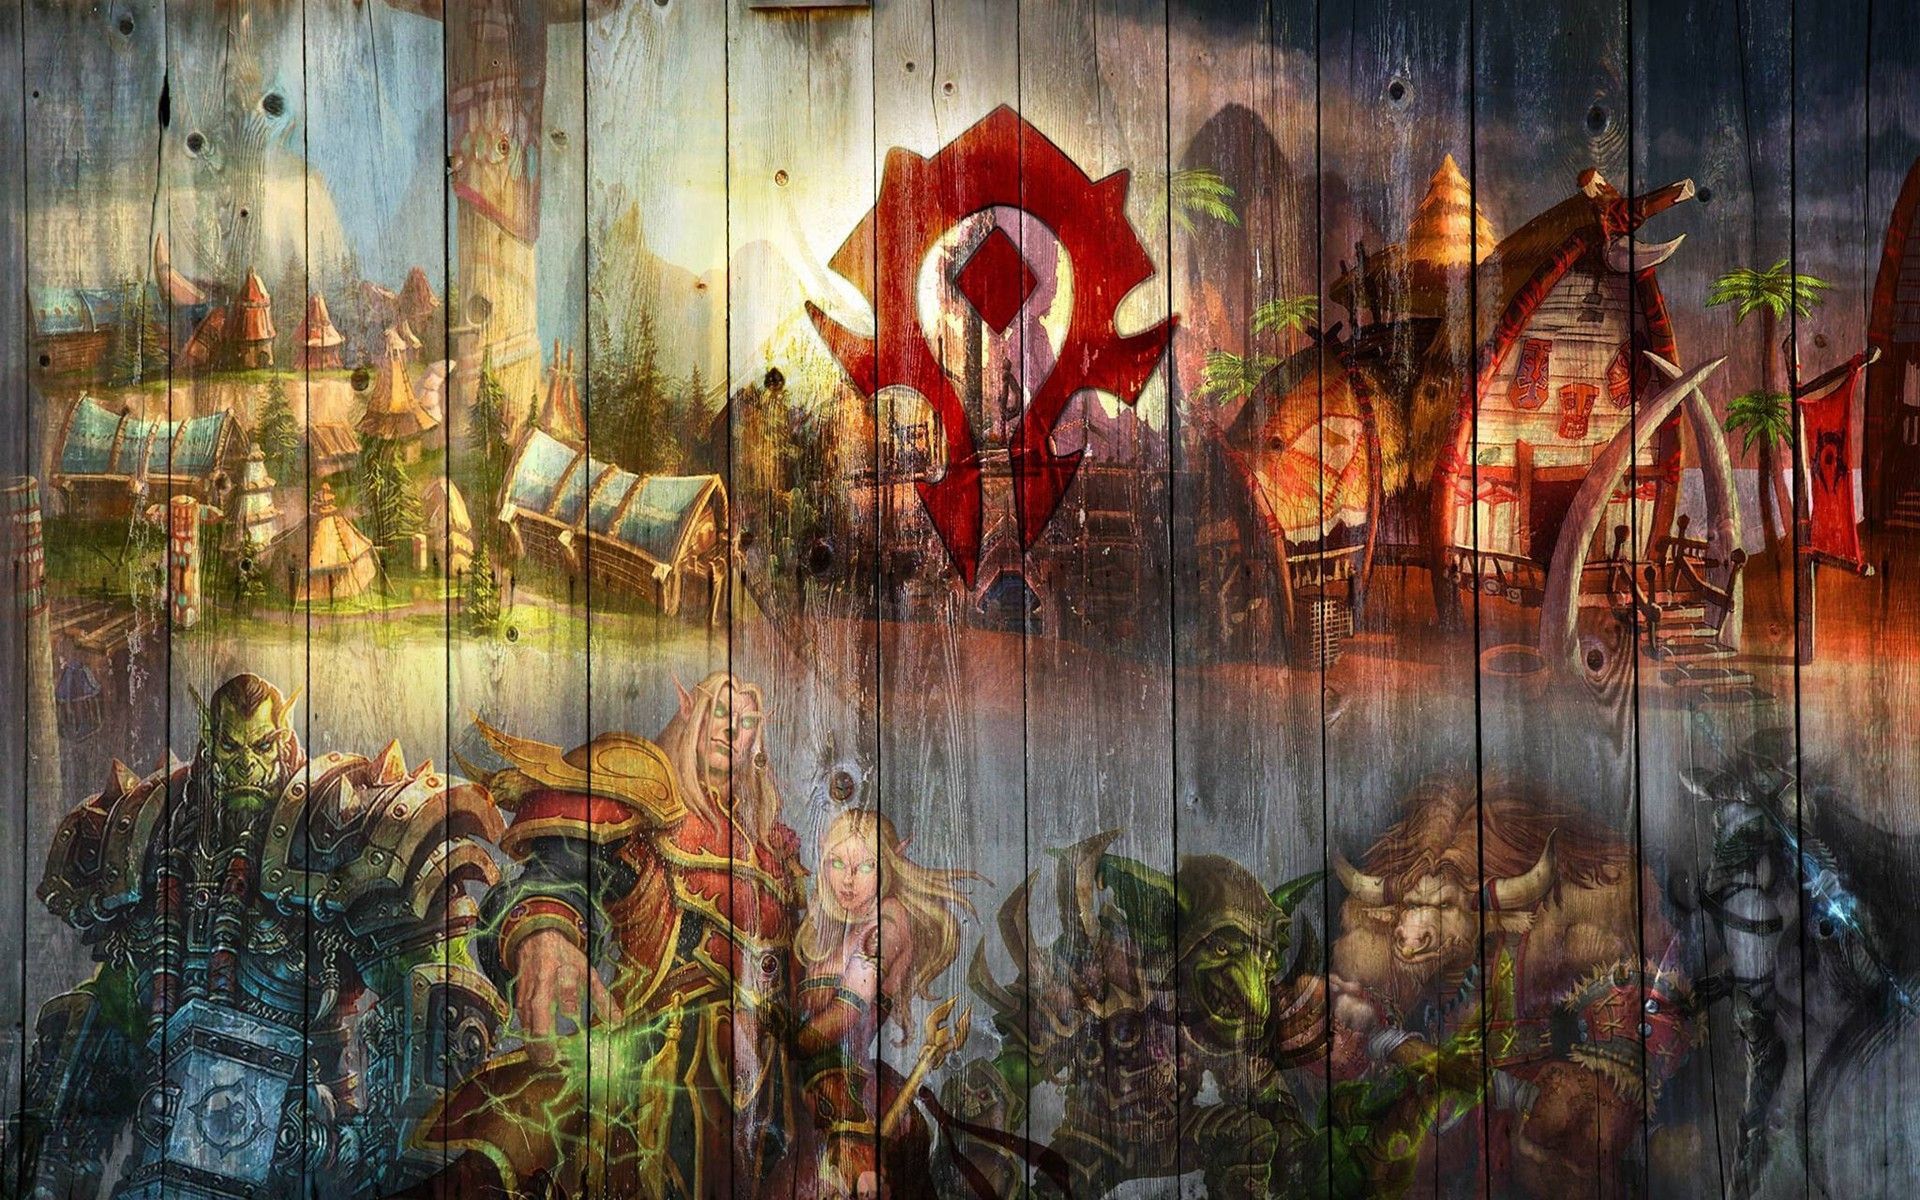 World Of Warcraft Backgrounds Wallpapers